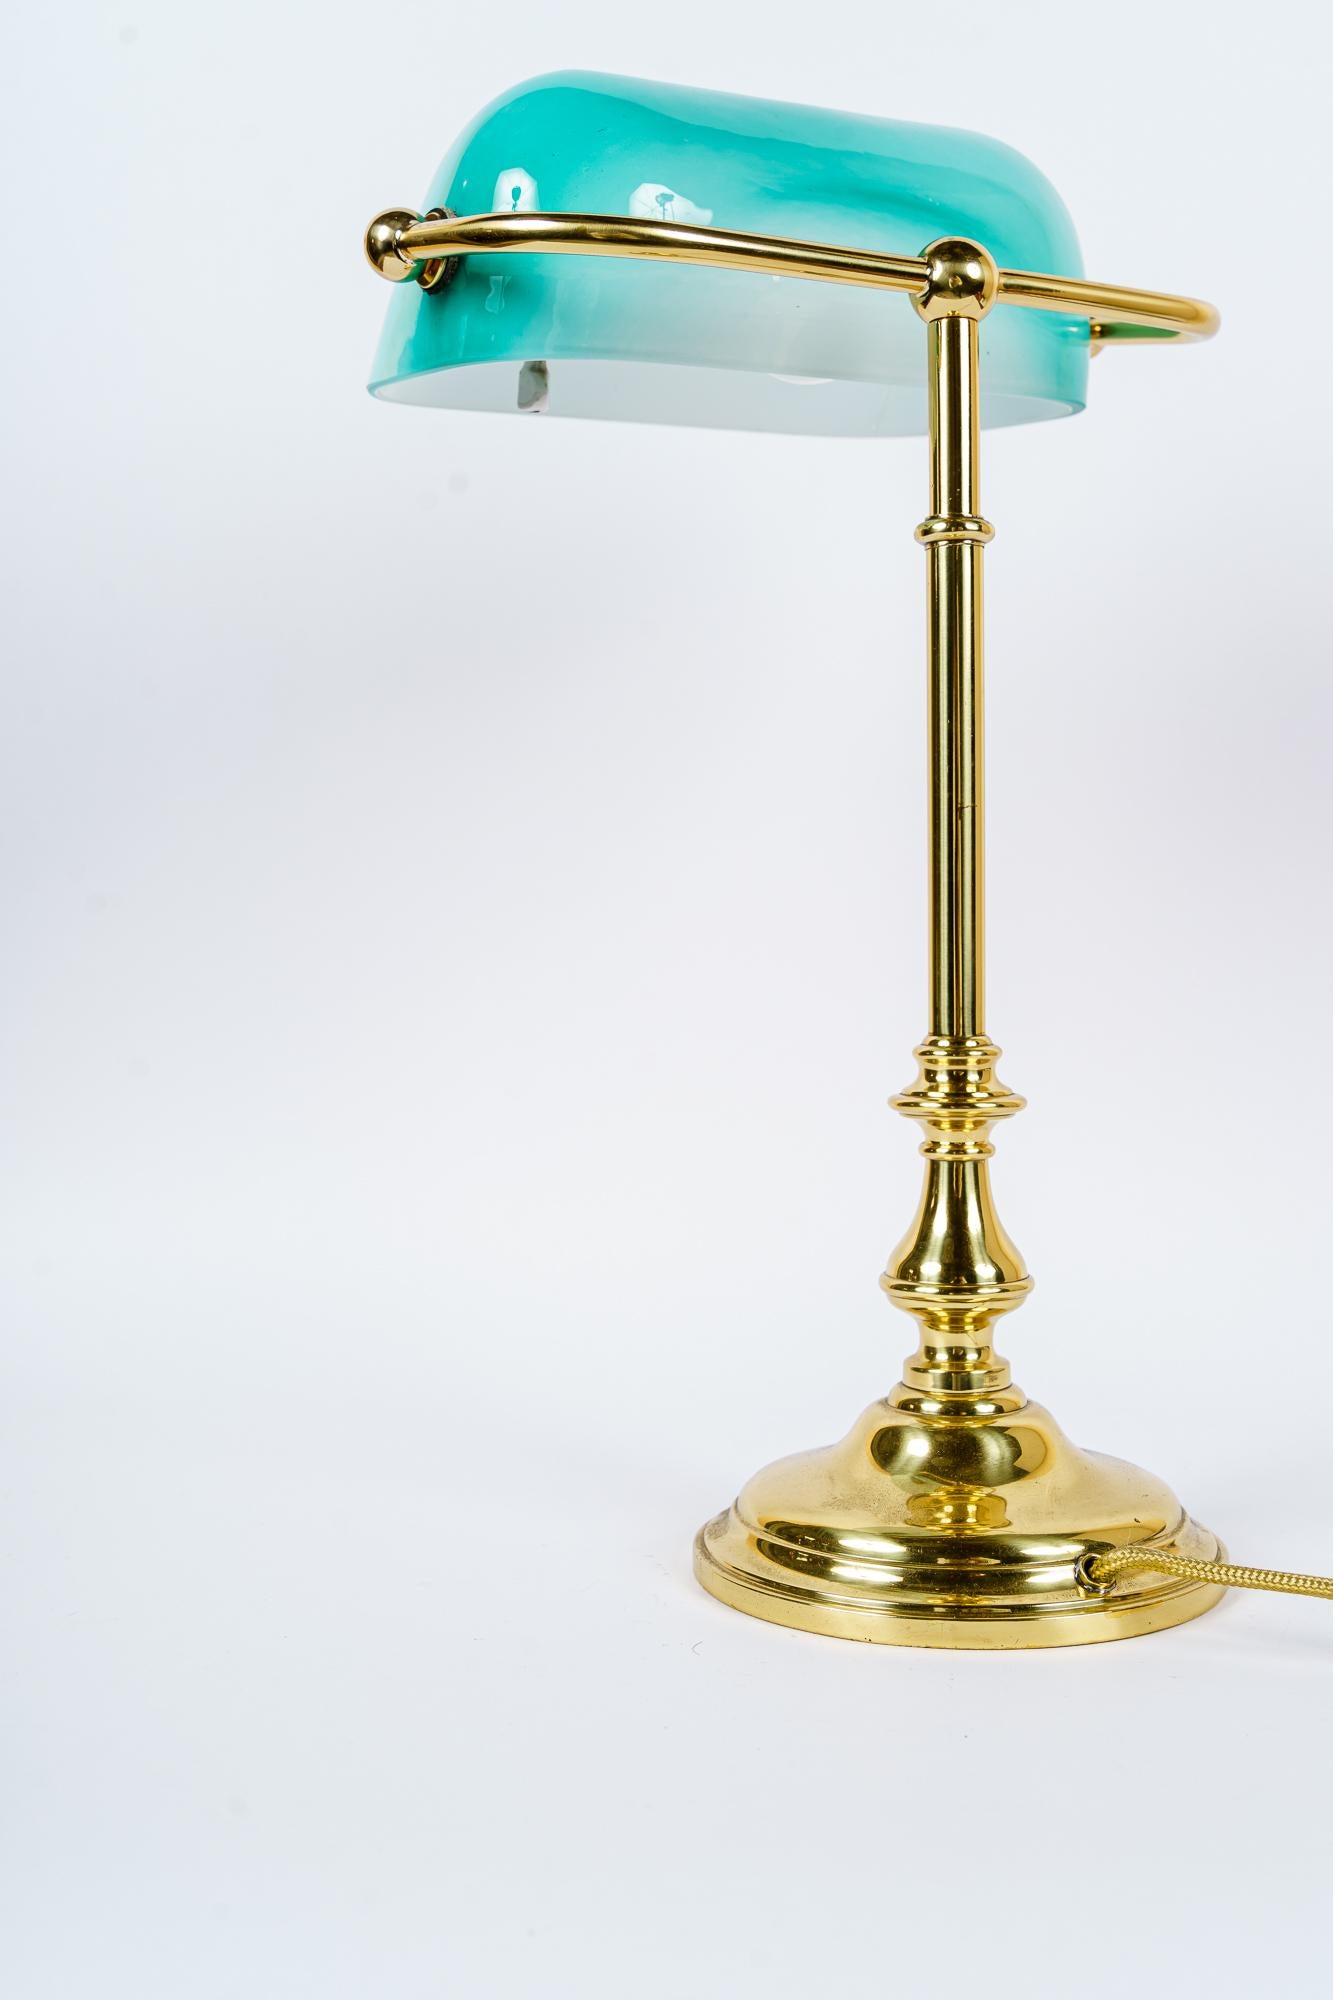 Art Deco table lamp ( banker lamp ) vienna around 1920s
Brass polished and stove enameled
rare original light green glass shade.